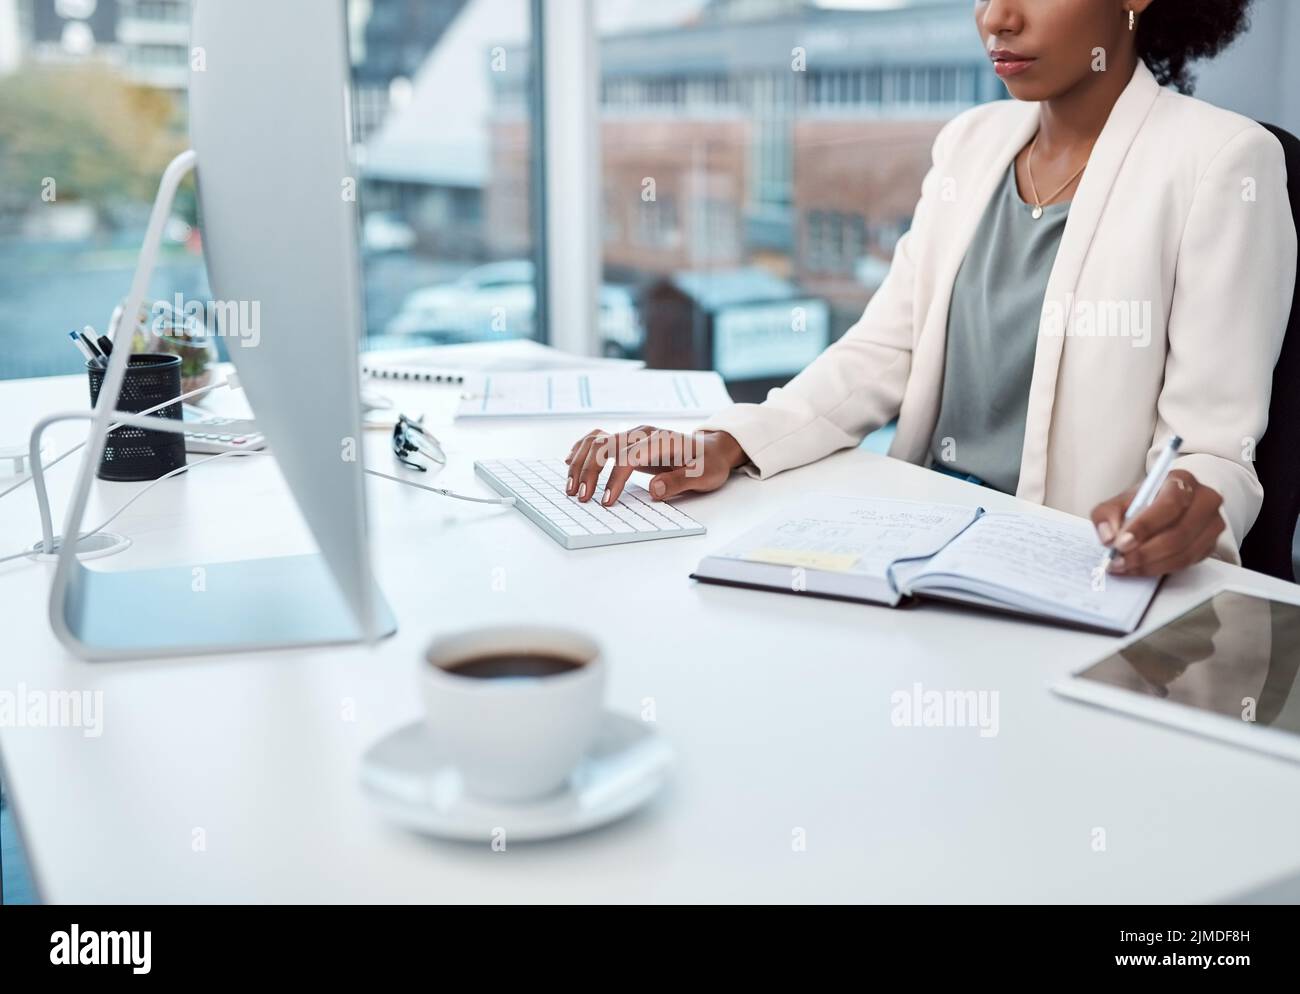 Writing notes, typing on a computer and working at her desk with a corporate and professional business woman. Manager, boss or CEO scheduling Stock Photo